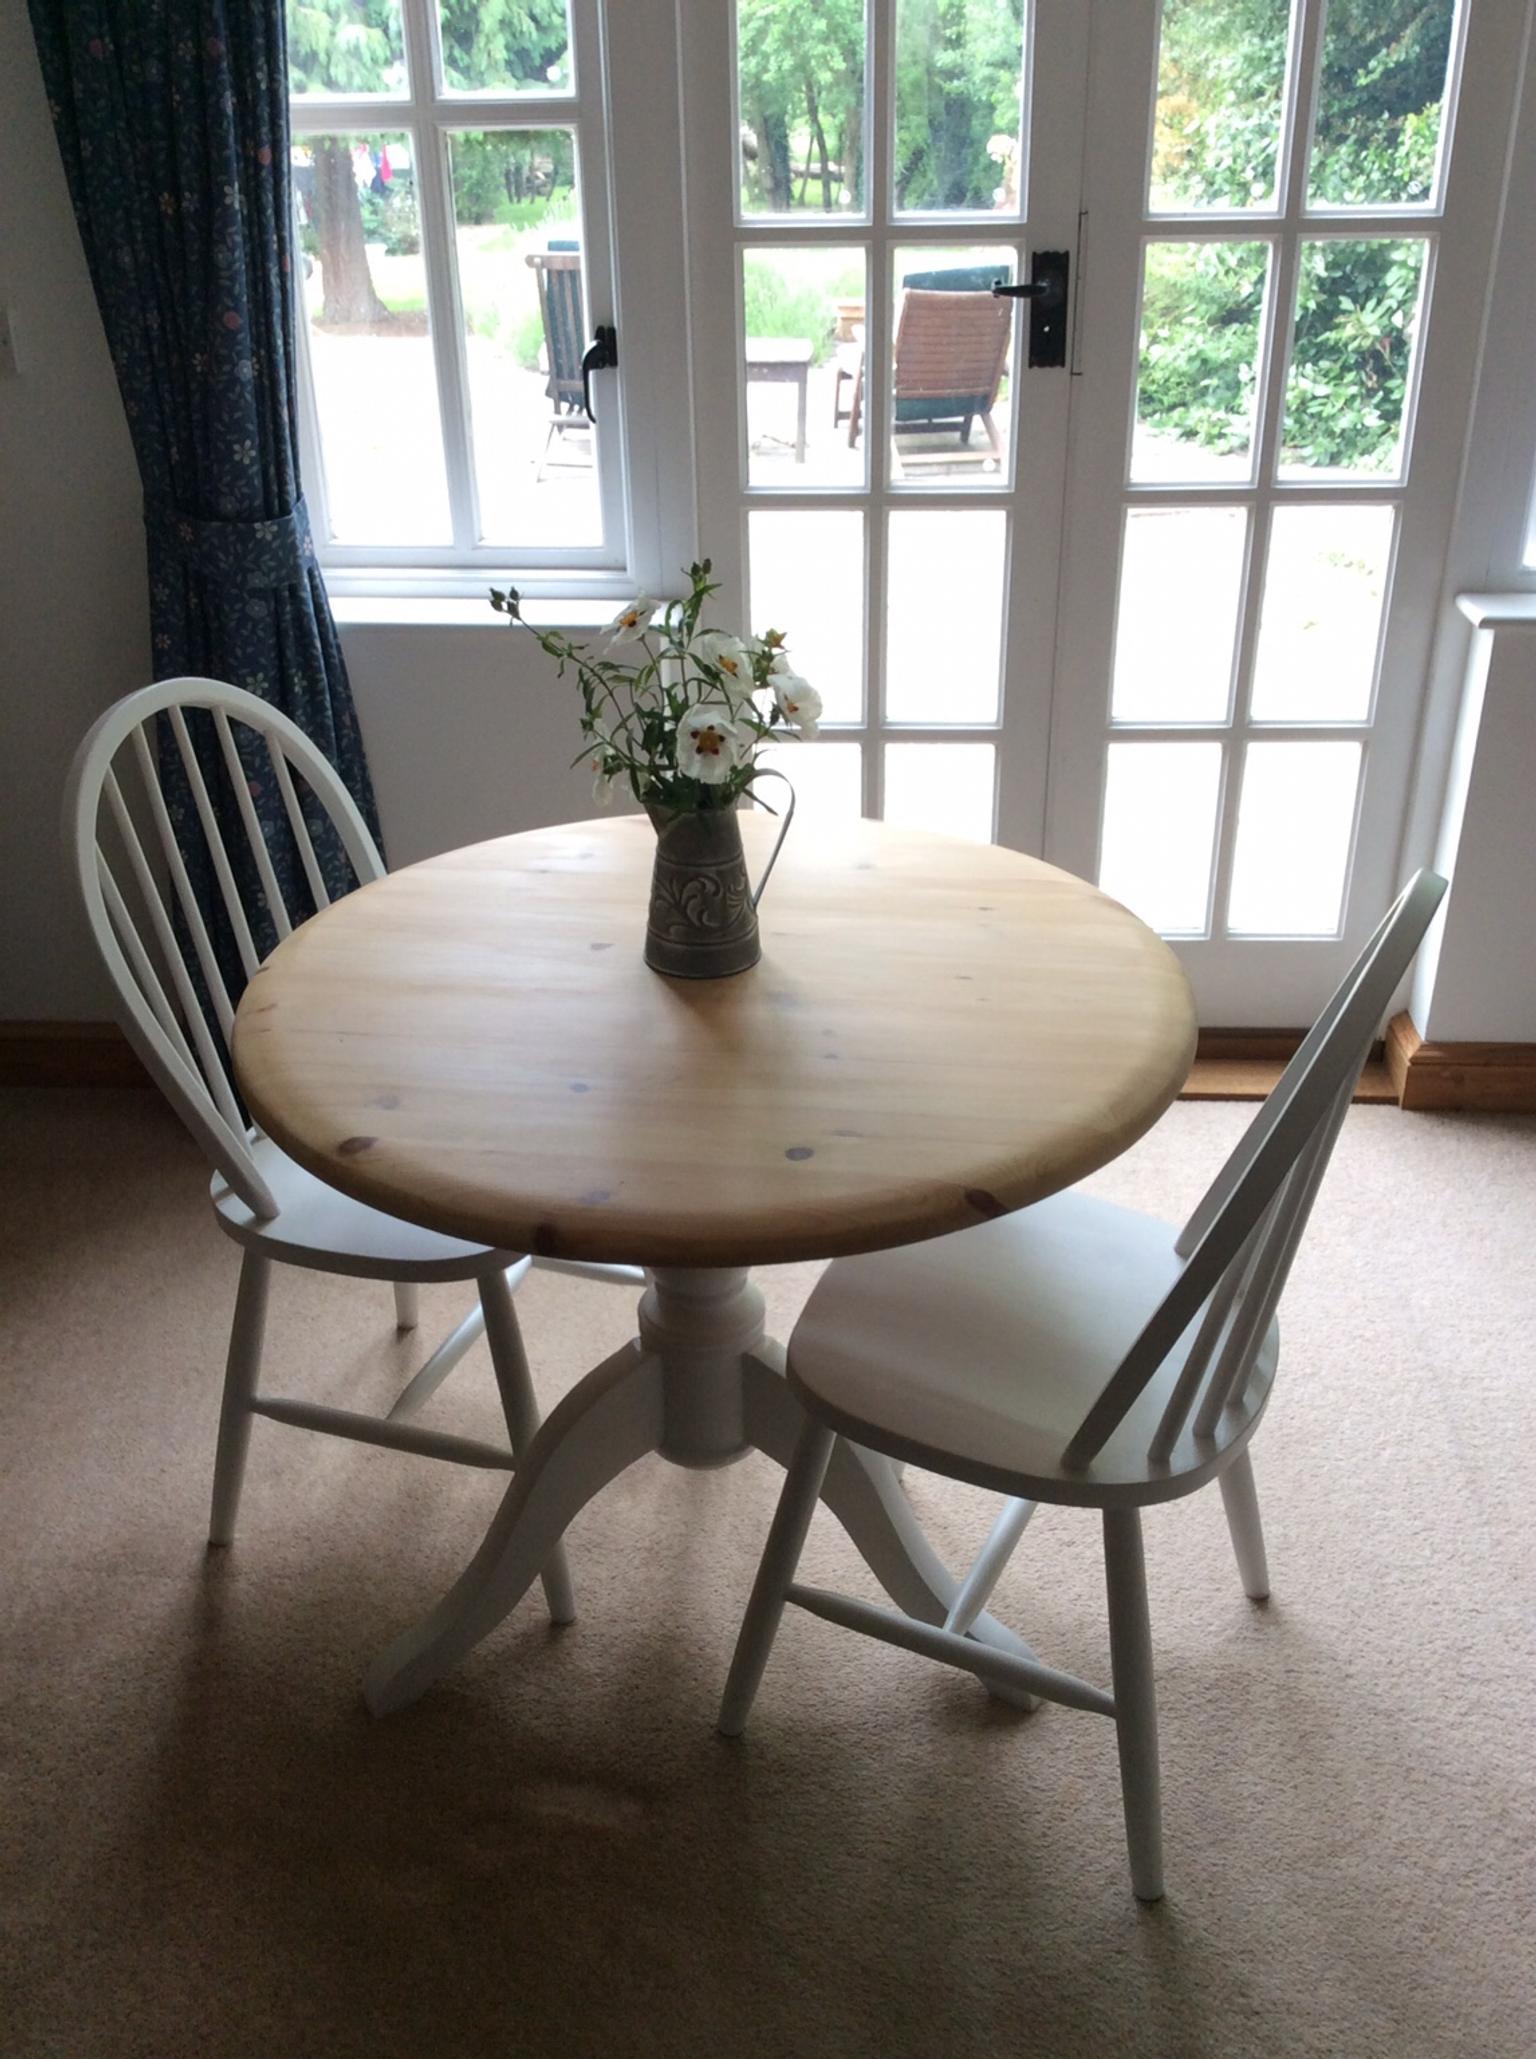 Refurbished Dining Table And Chairs In Cv47 Avon For 100 00 For Sale Shpock